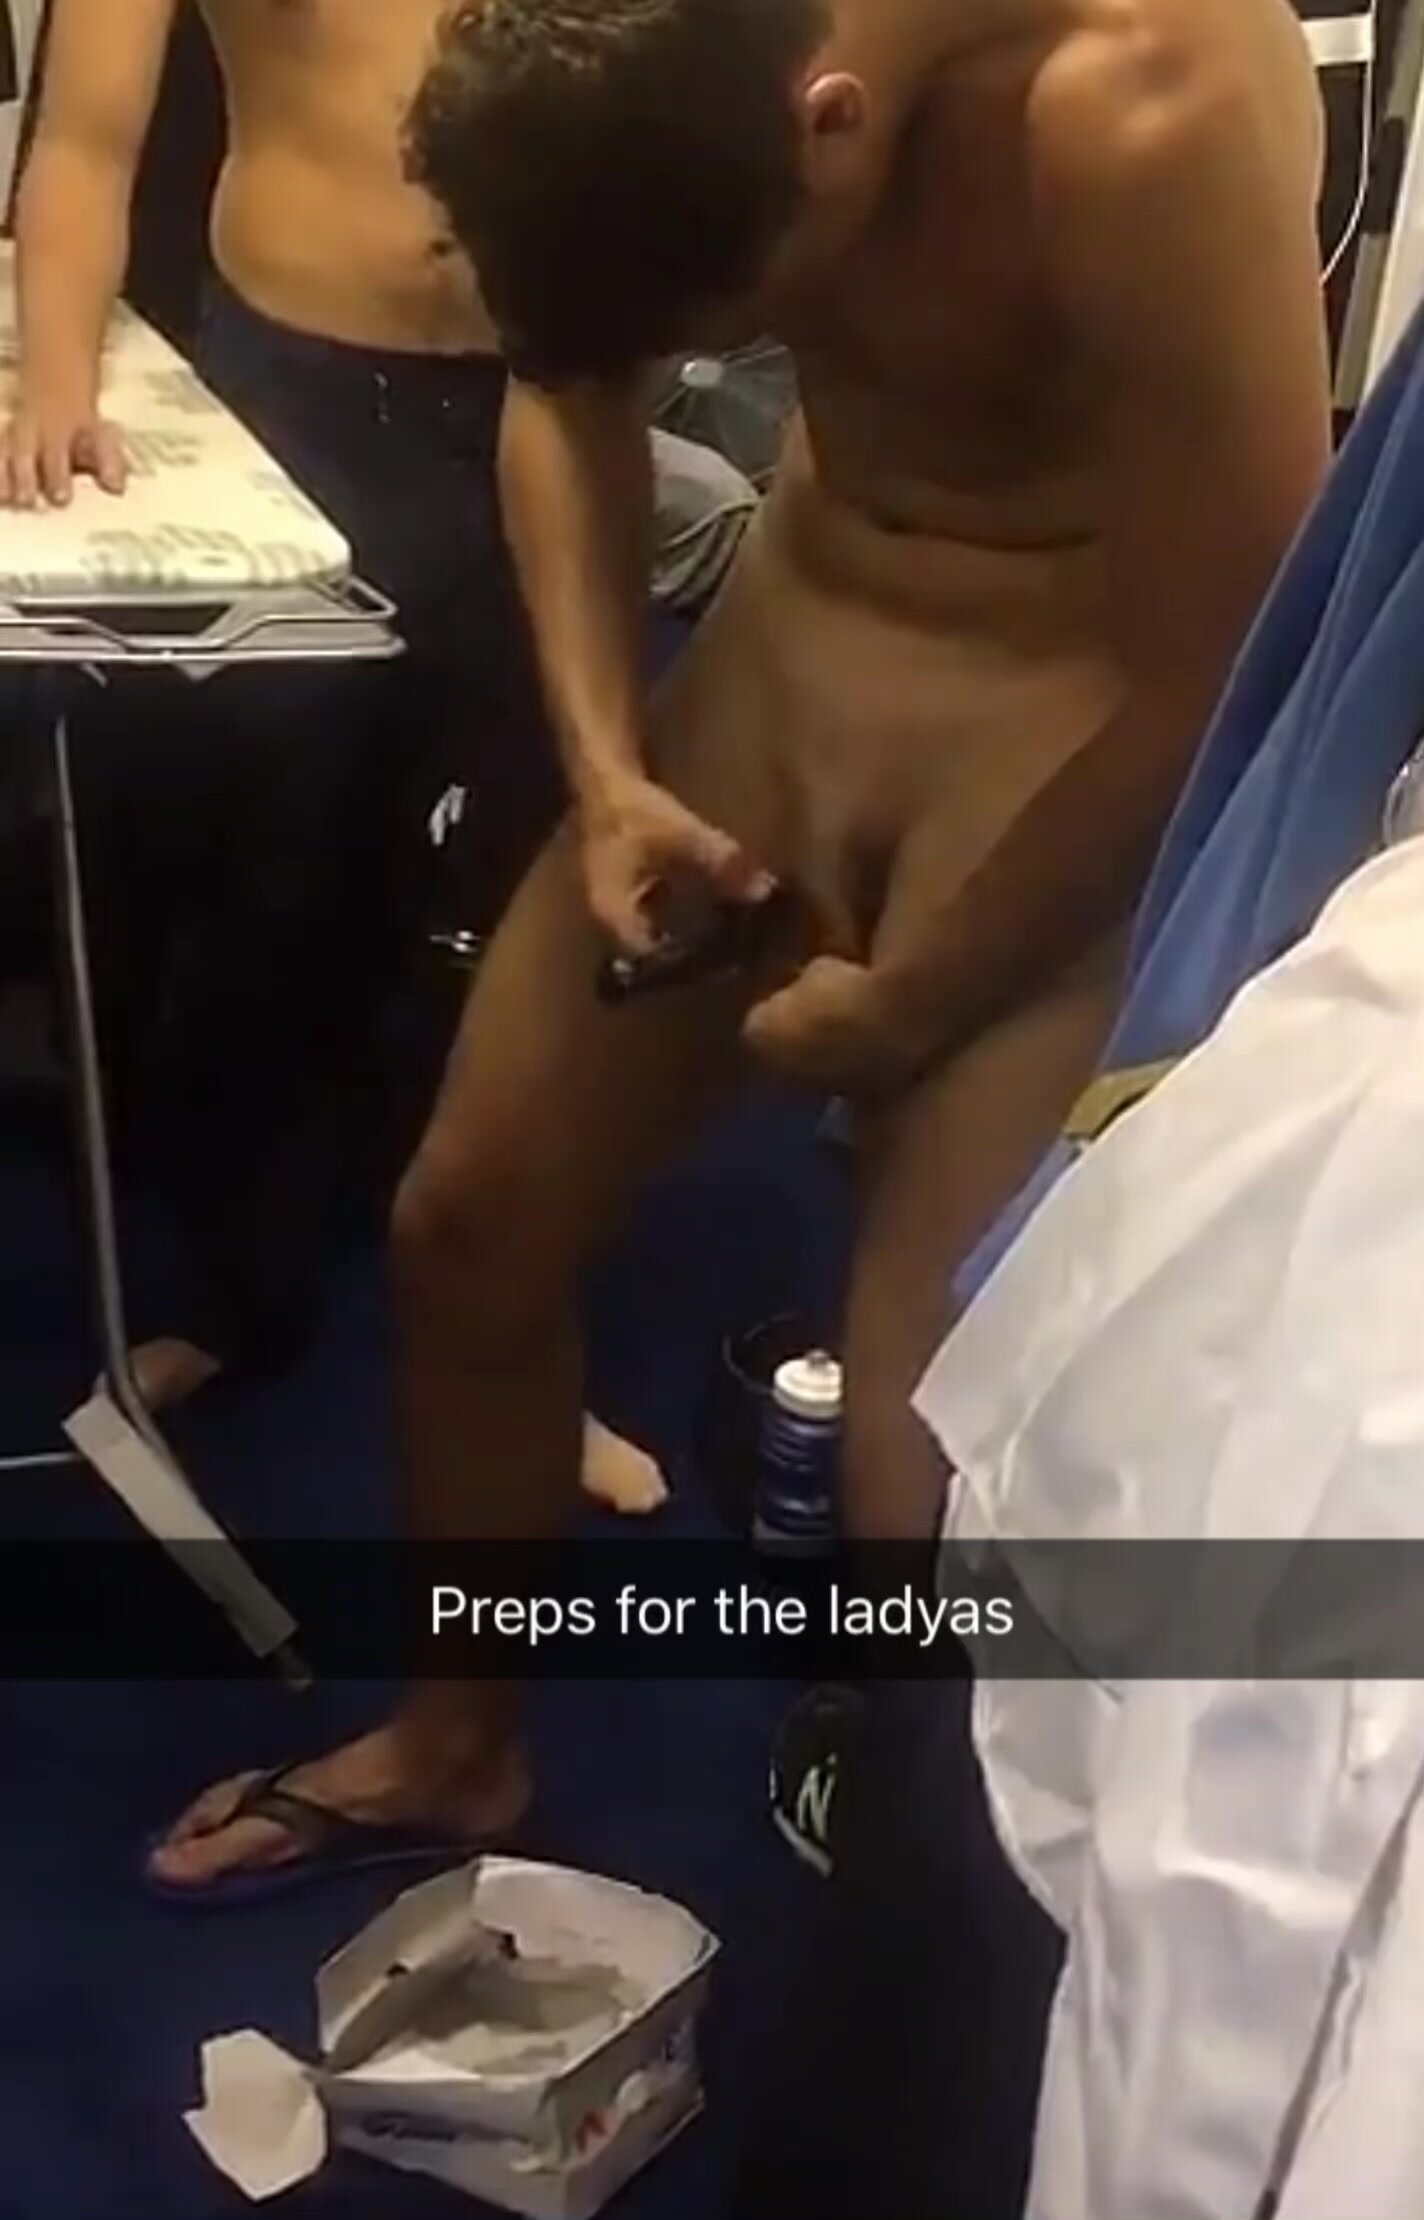 Shaving his pubes in the locker room